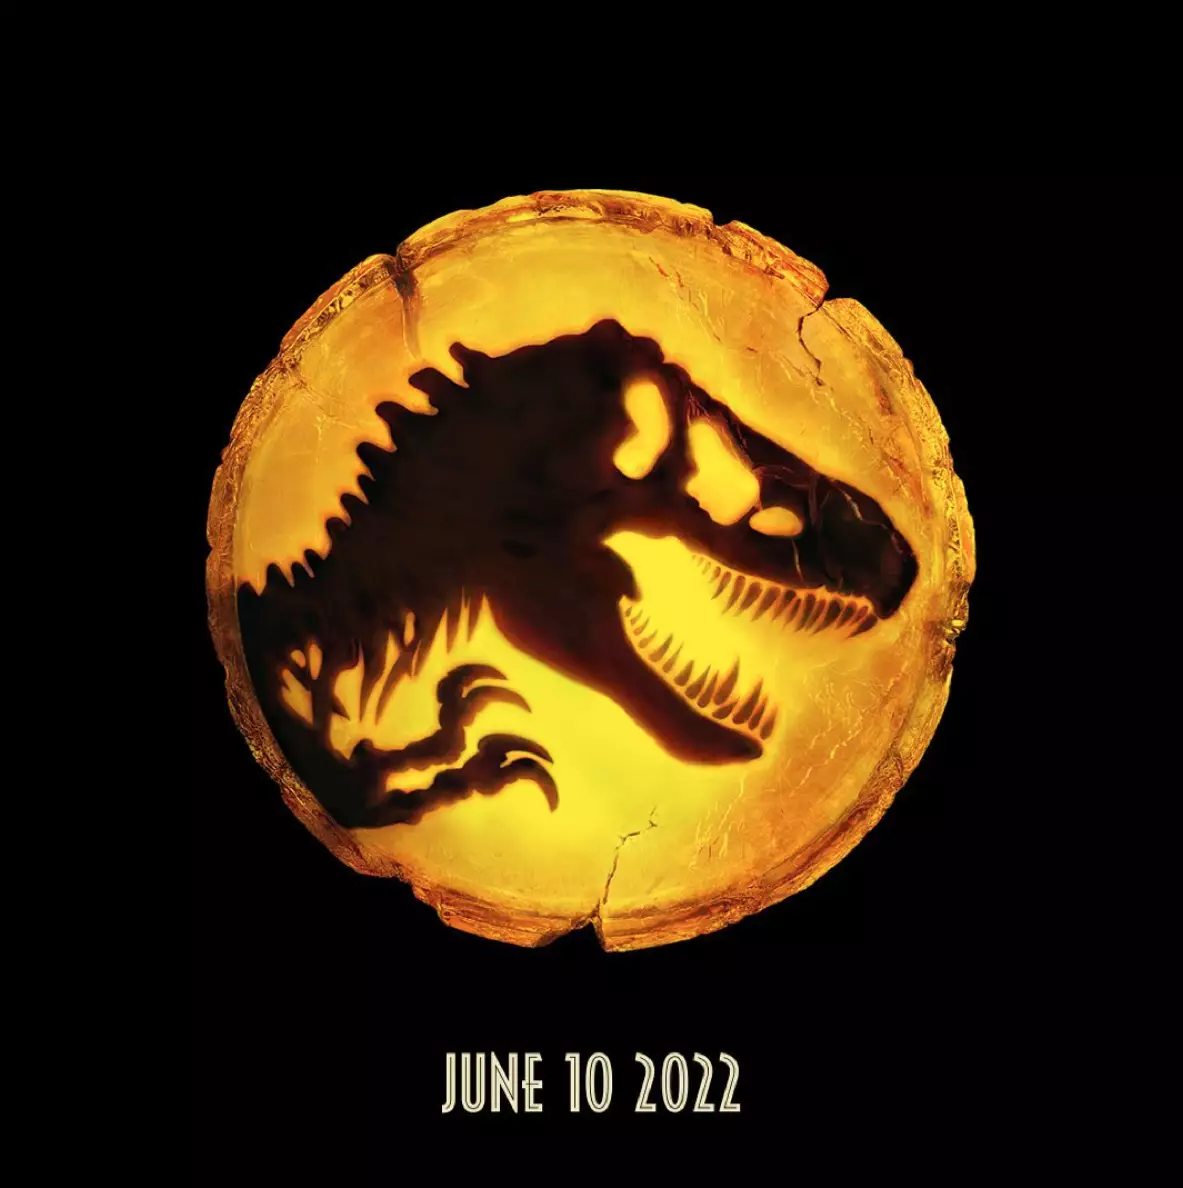 The release date for the third film in the Jurassic World franchise was announced on Thursday (